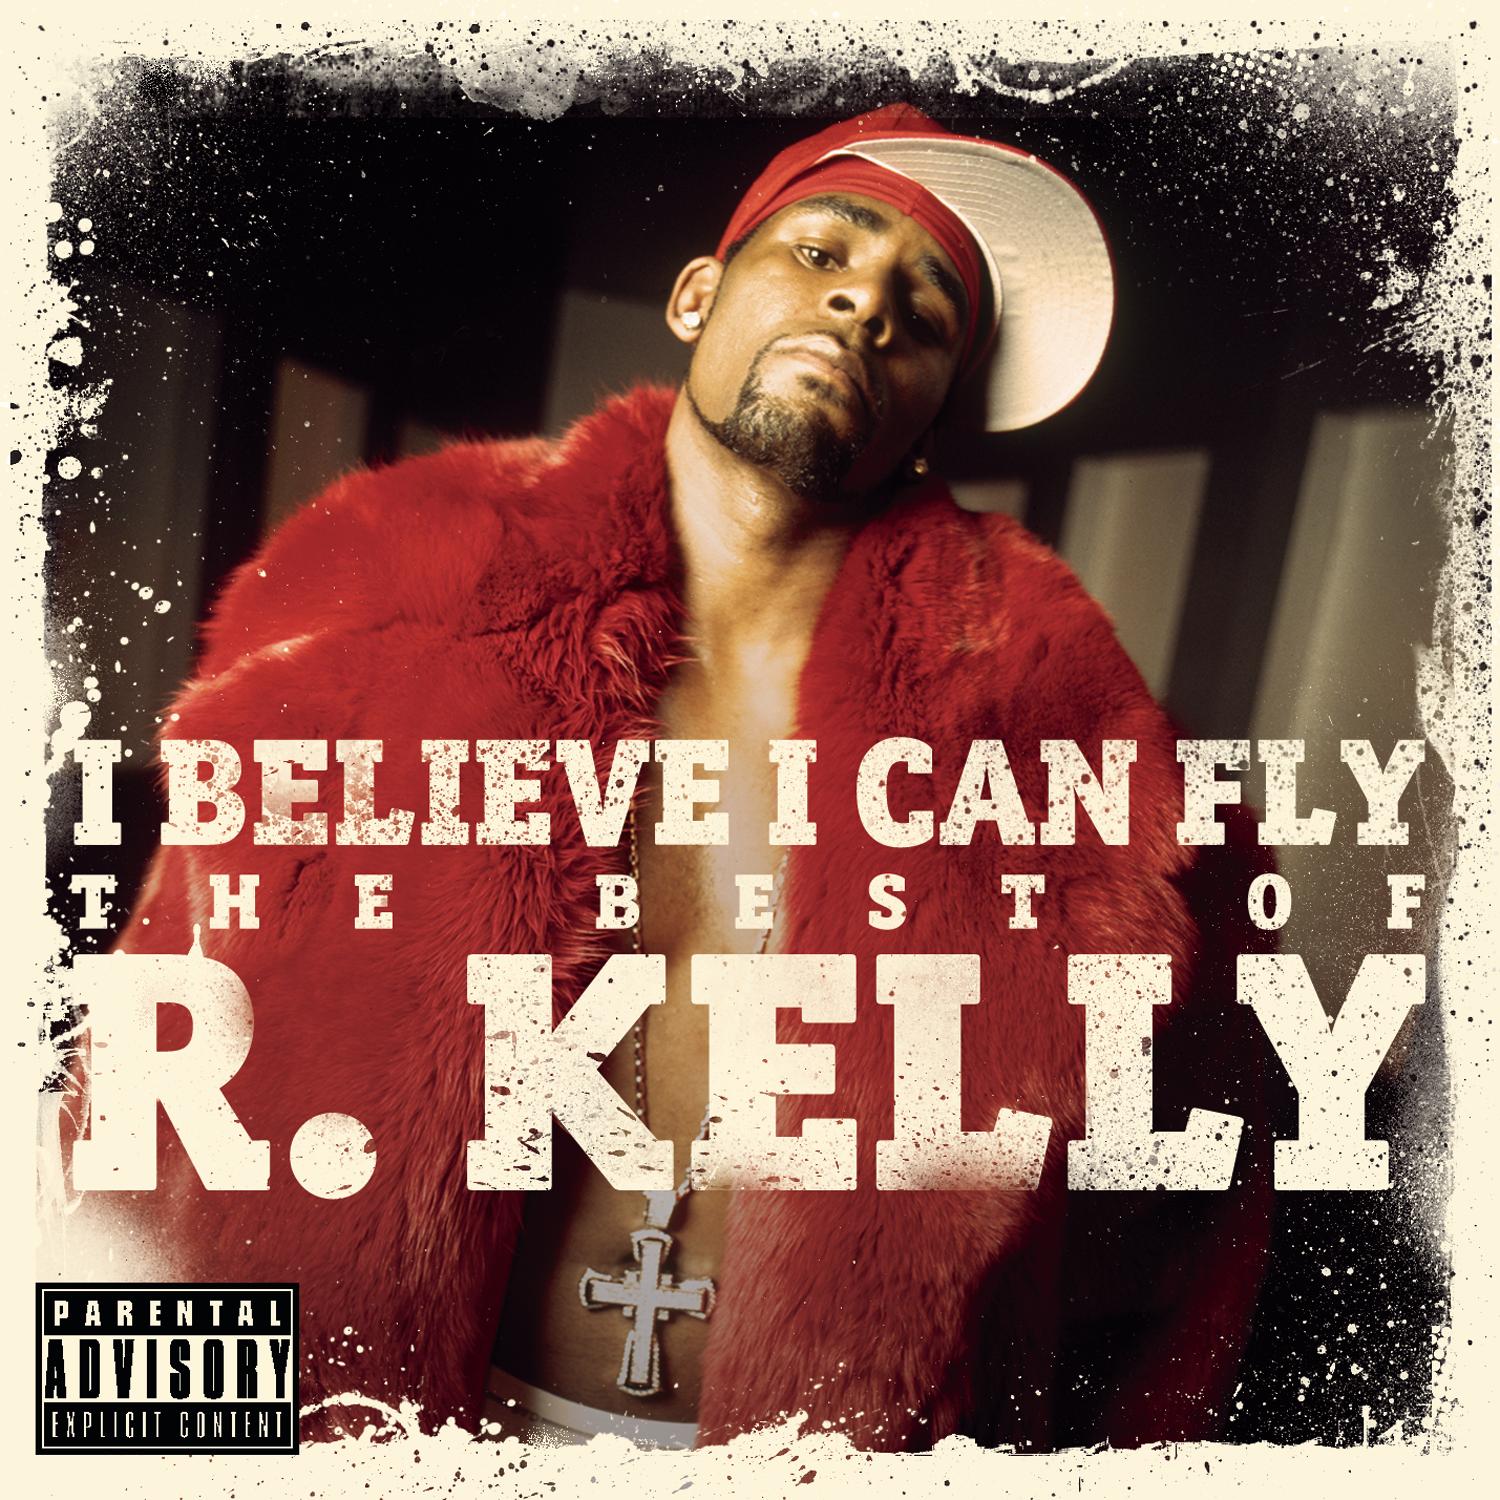 I Believe I Can Fly: The Best of R.Kelly